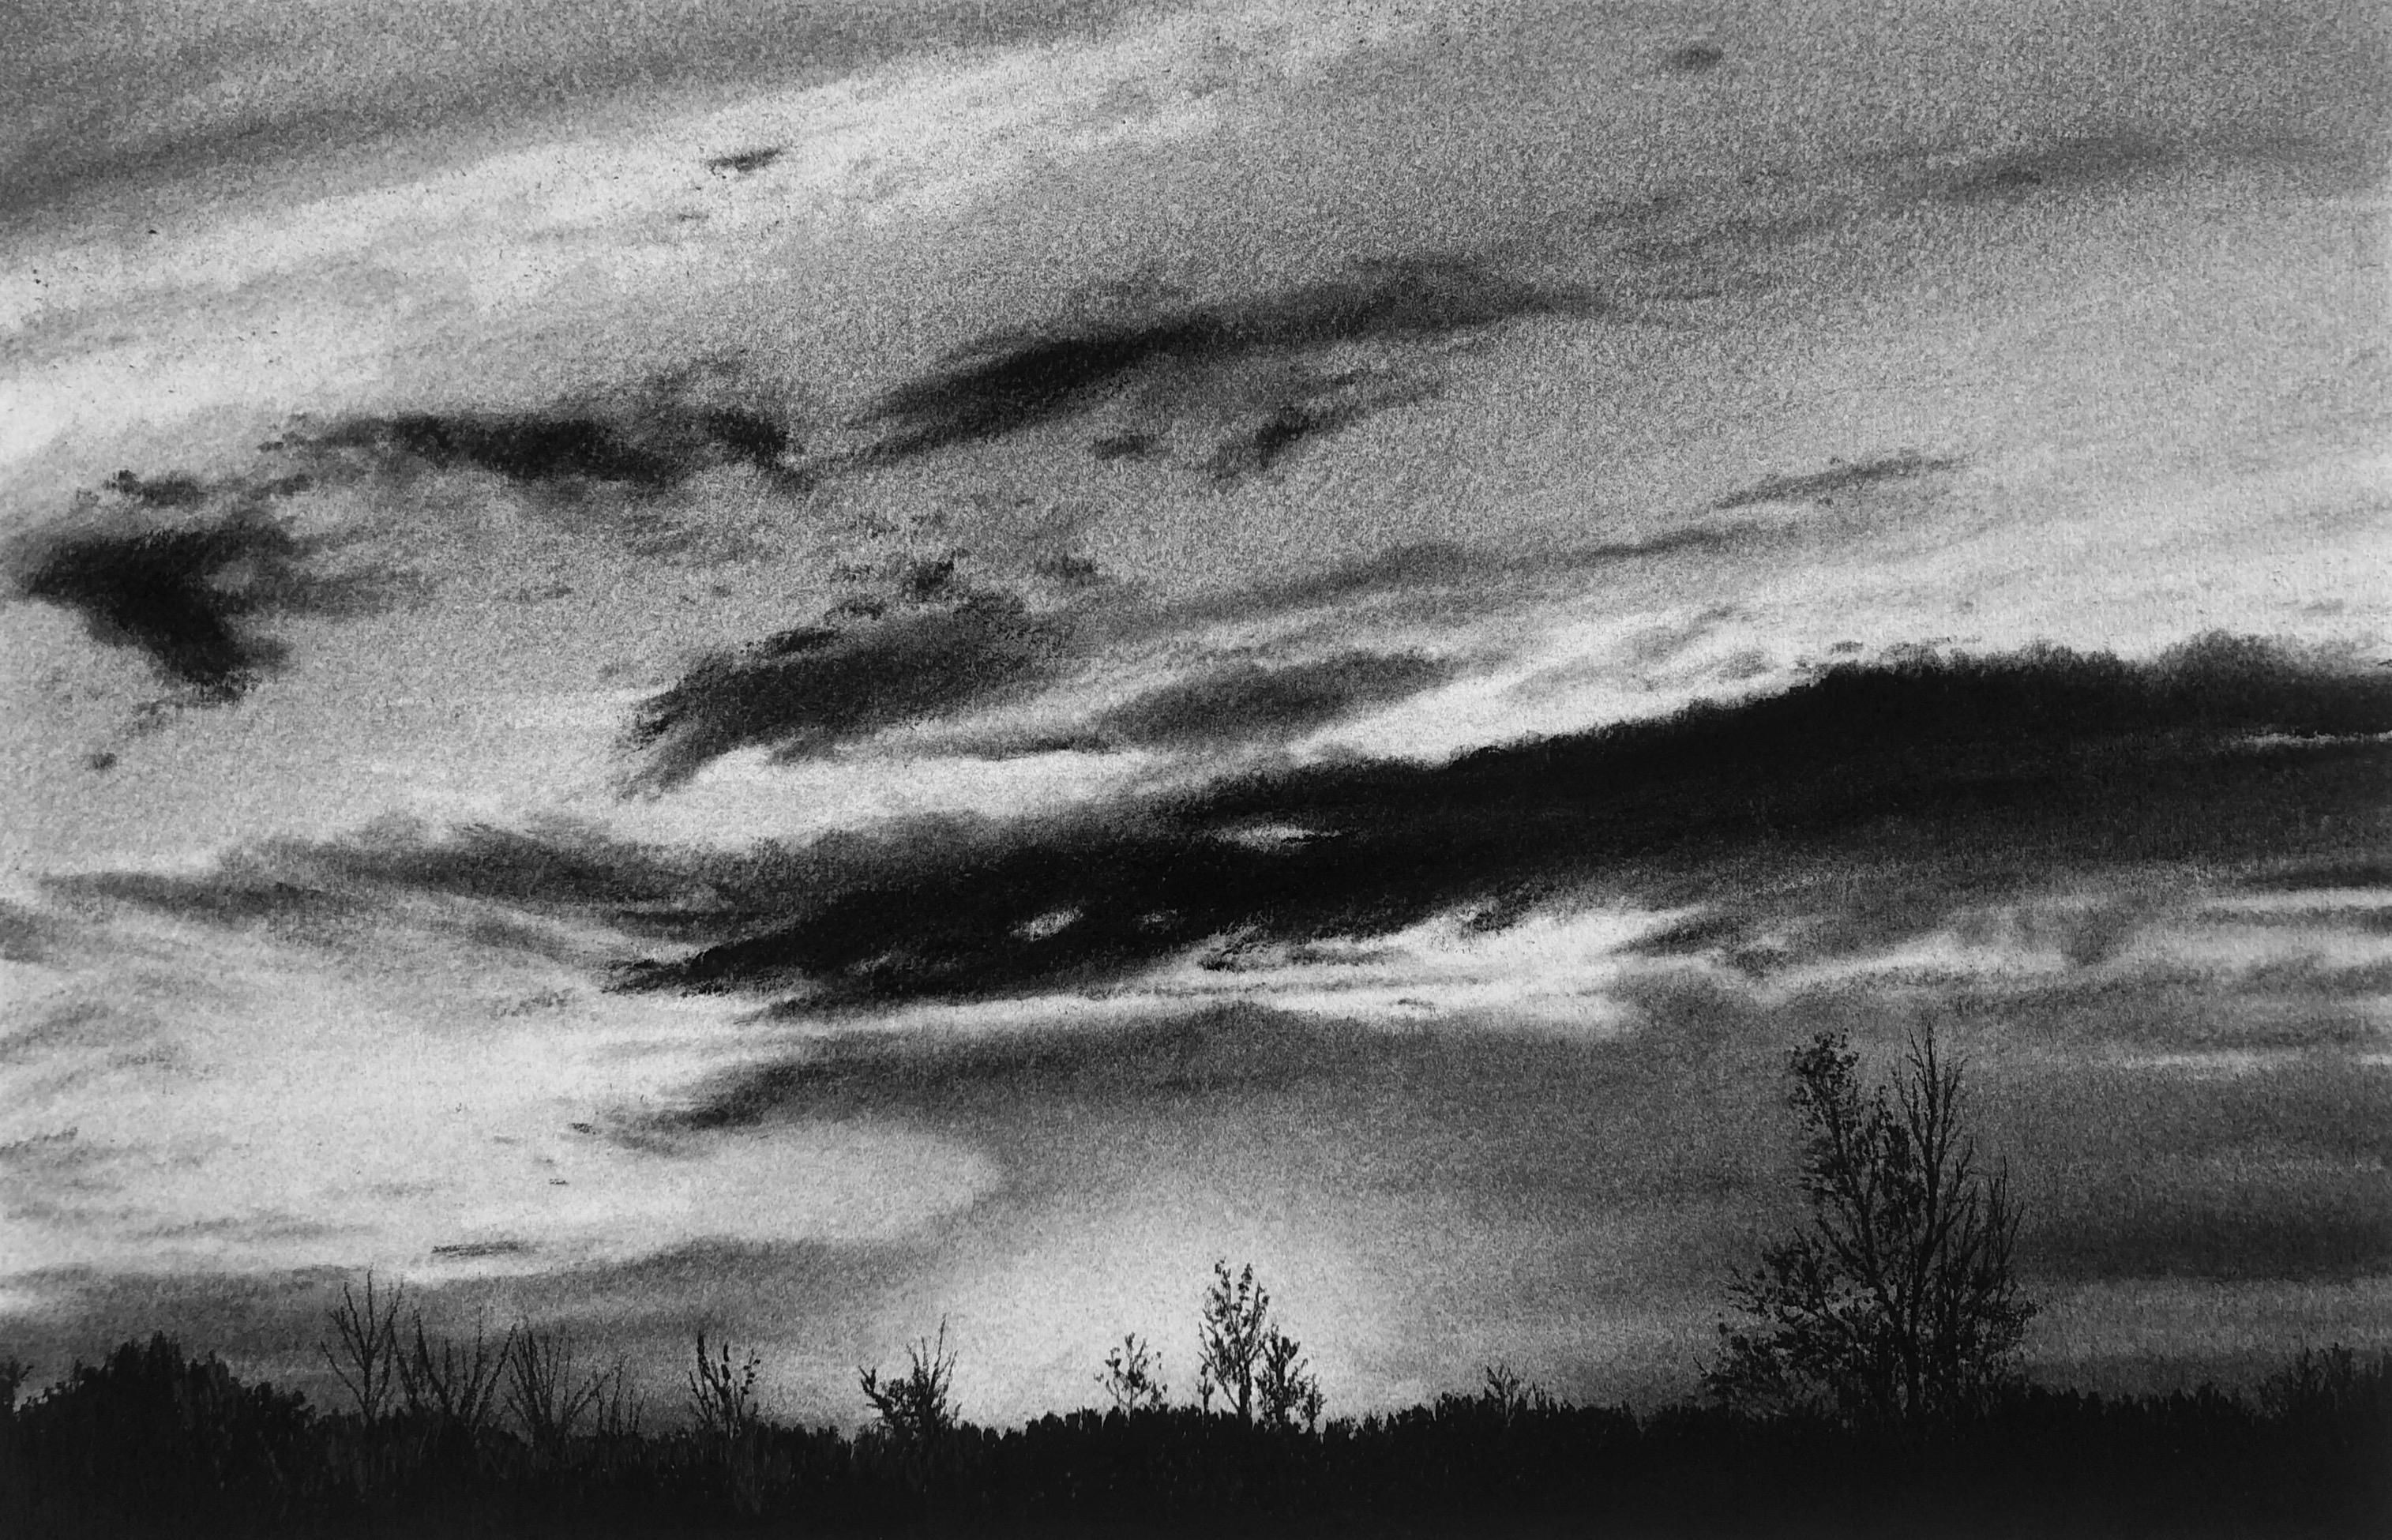 Katherine Curci Landscape Art - Autumn Sunset in Campbellville, black and white charcoal drawing of sky